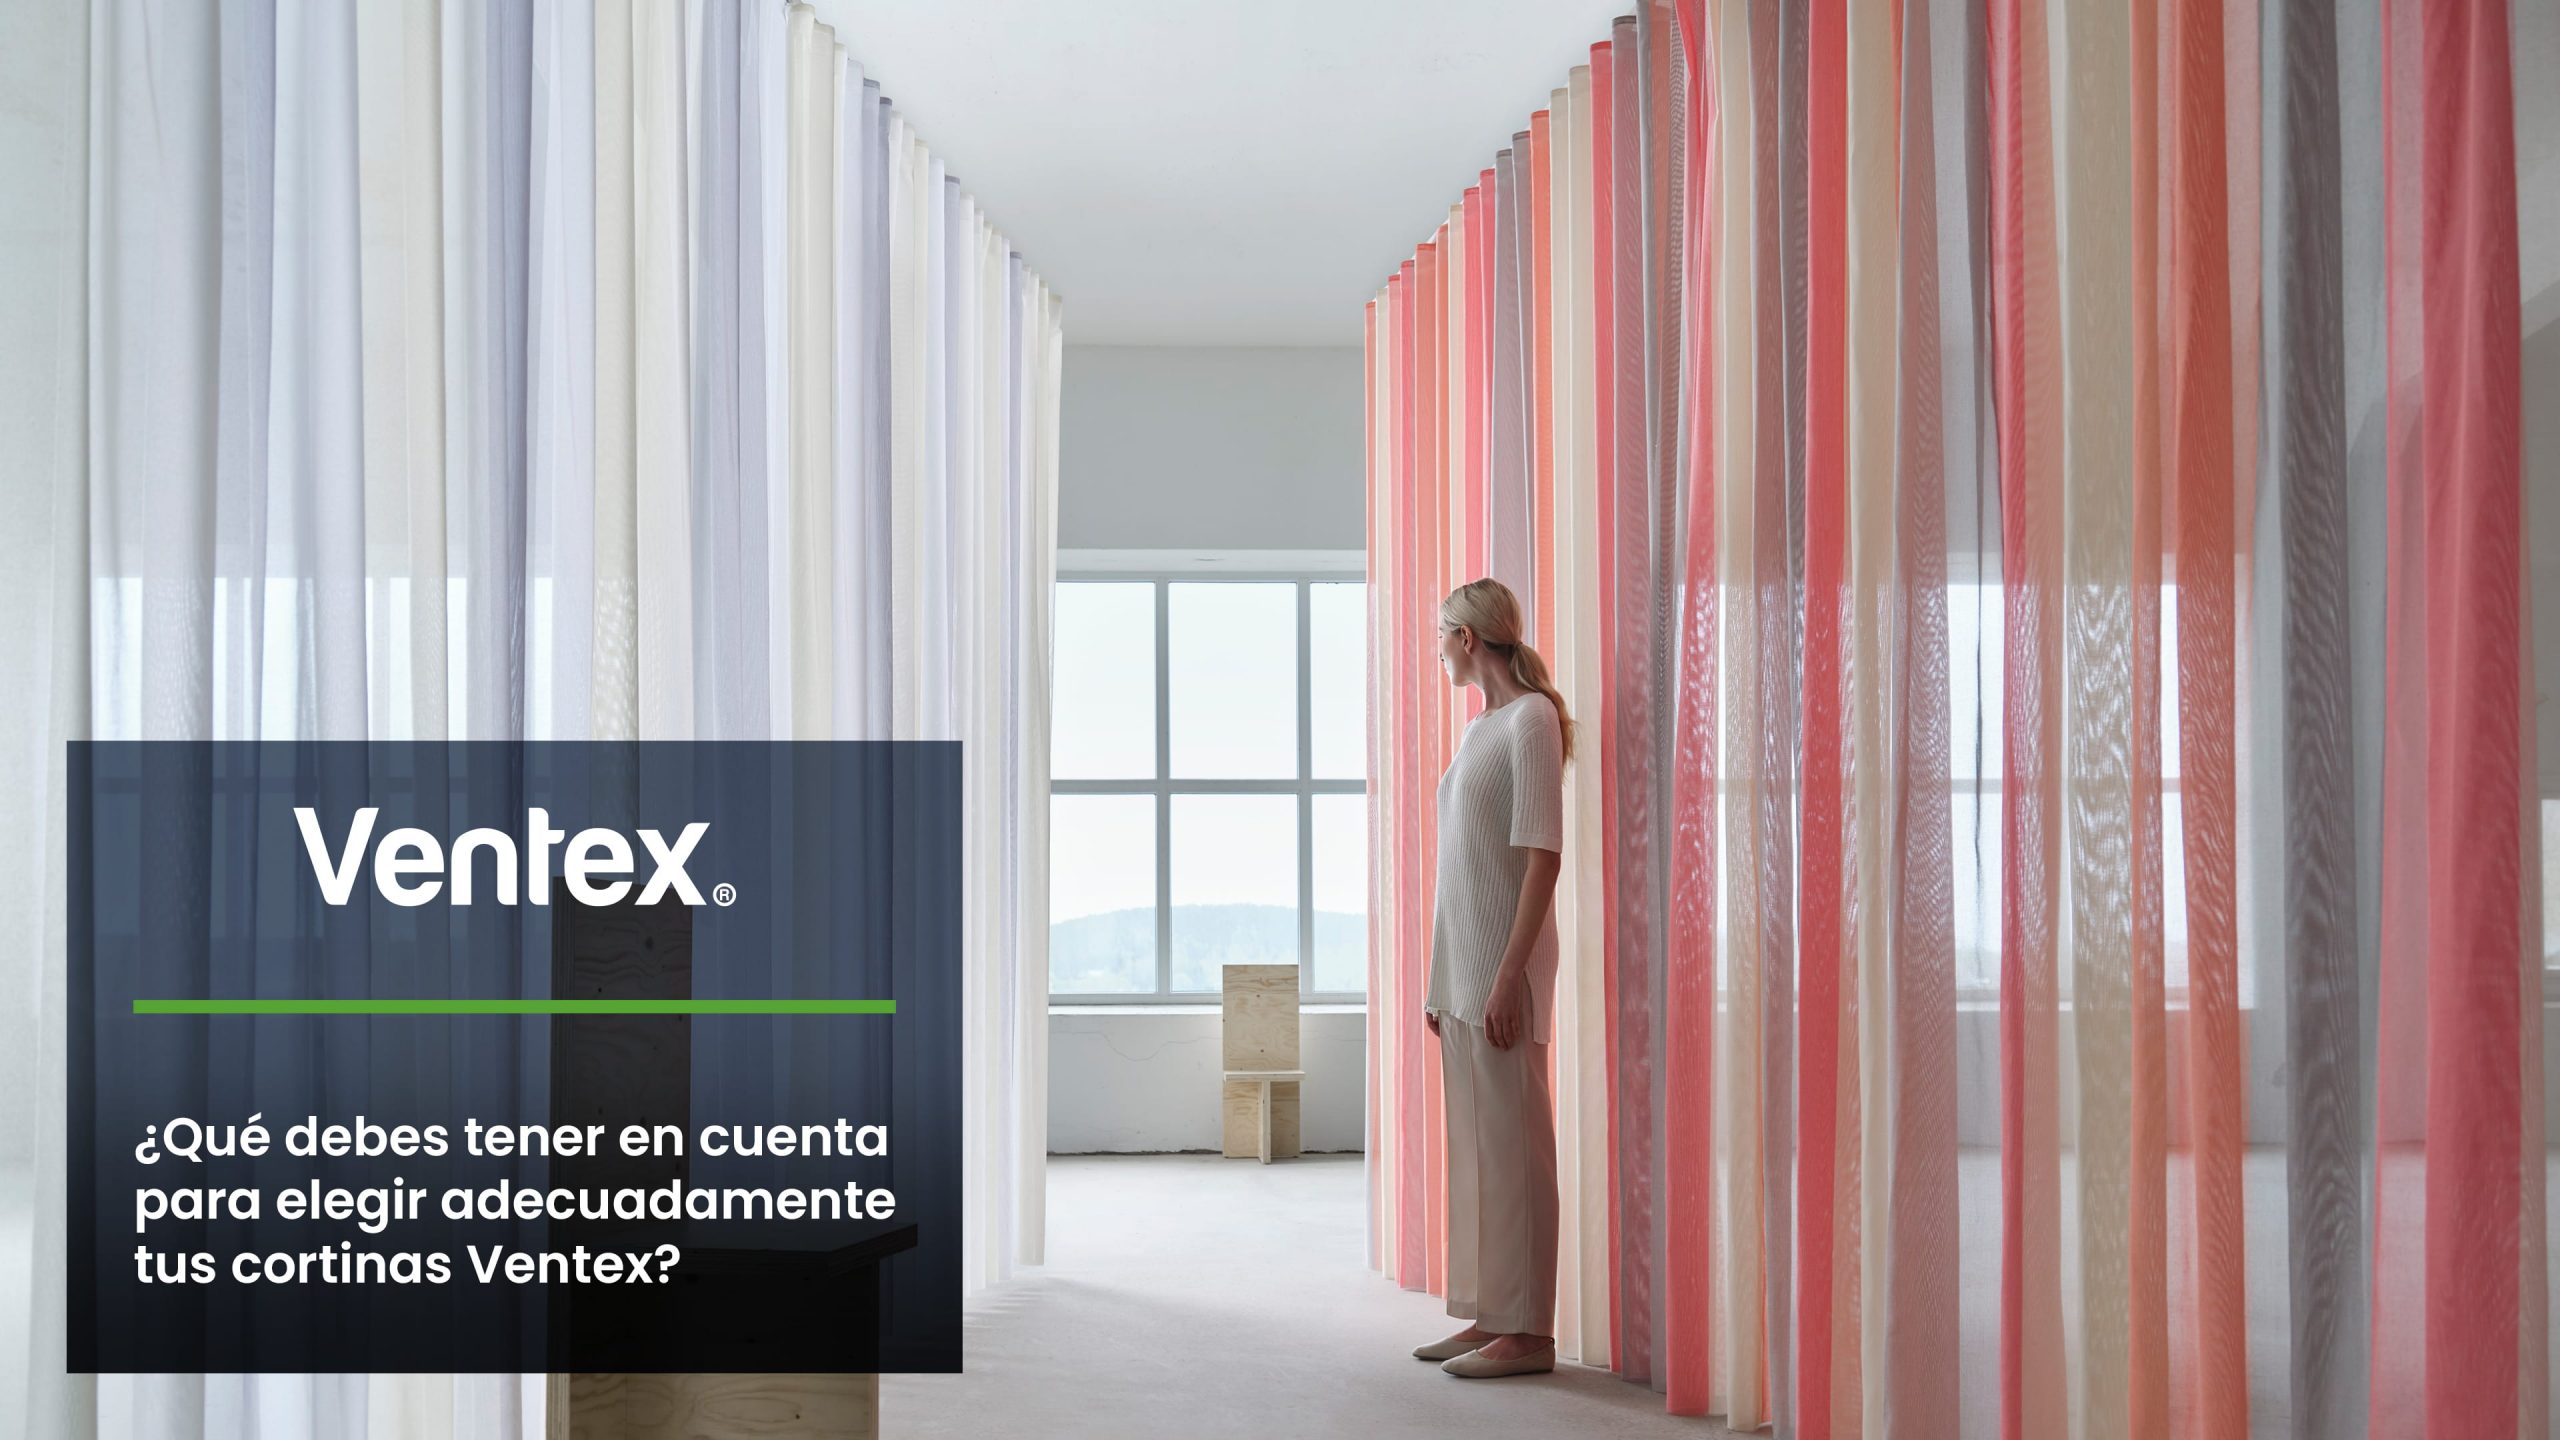 What do you need to consider when choosing Ventex curtains?